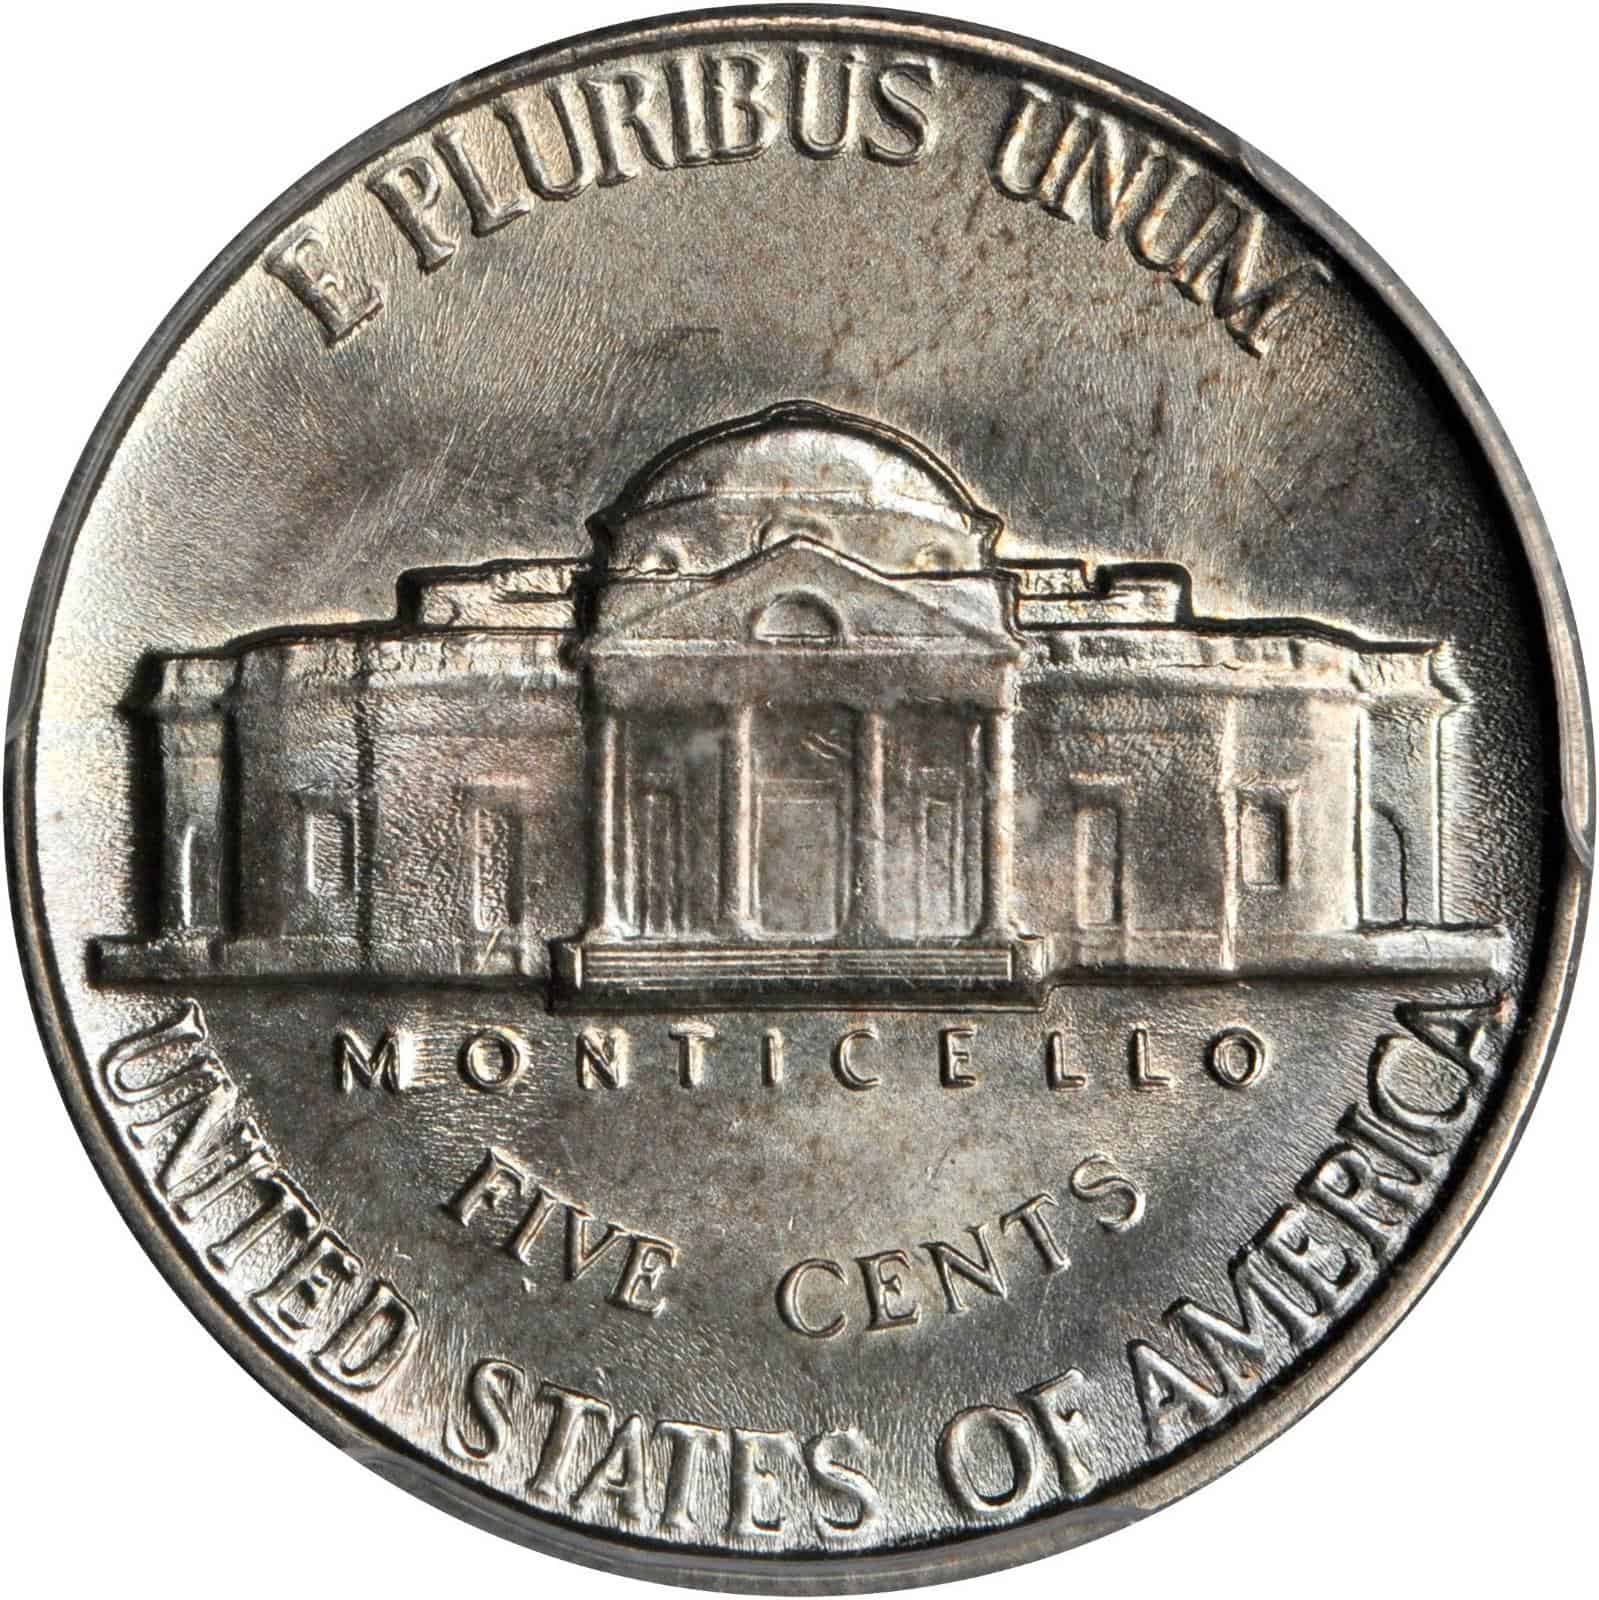 The reverse of the 1962 Jefferson nickel